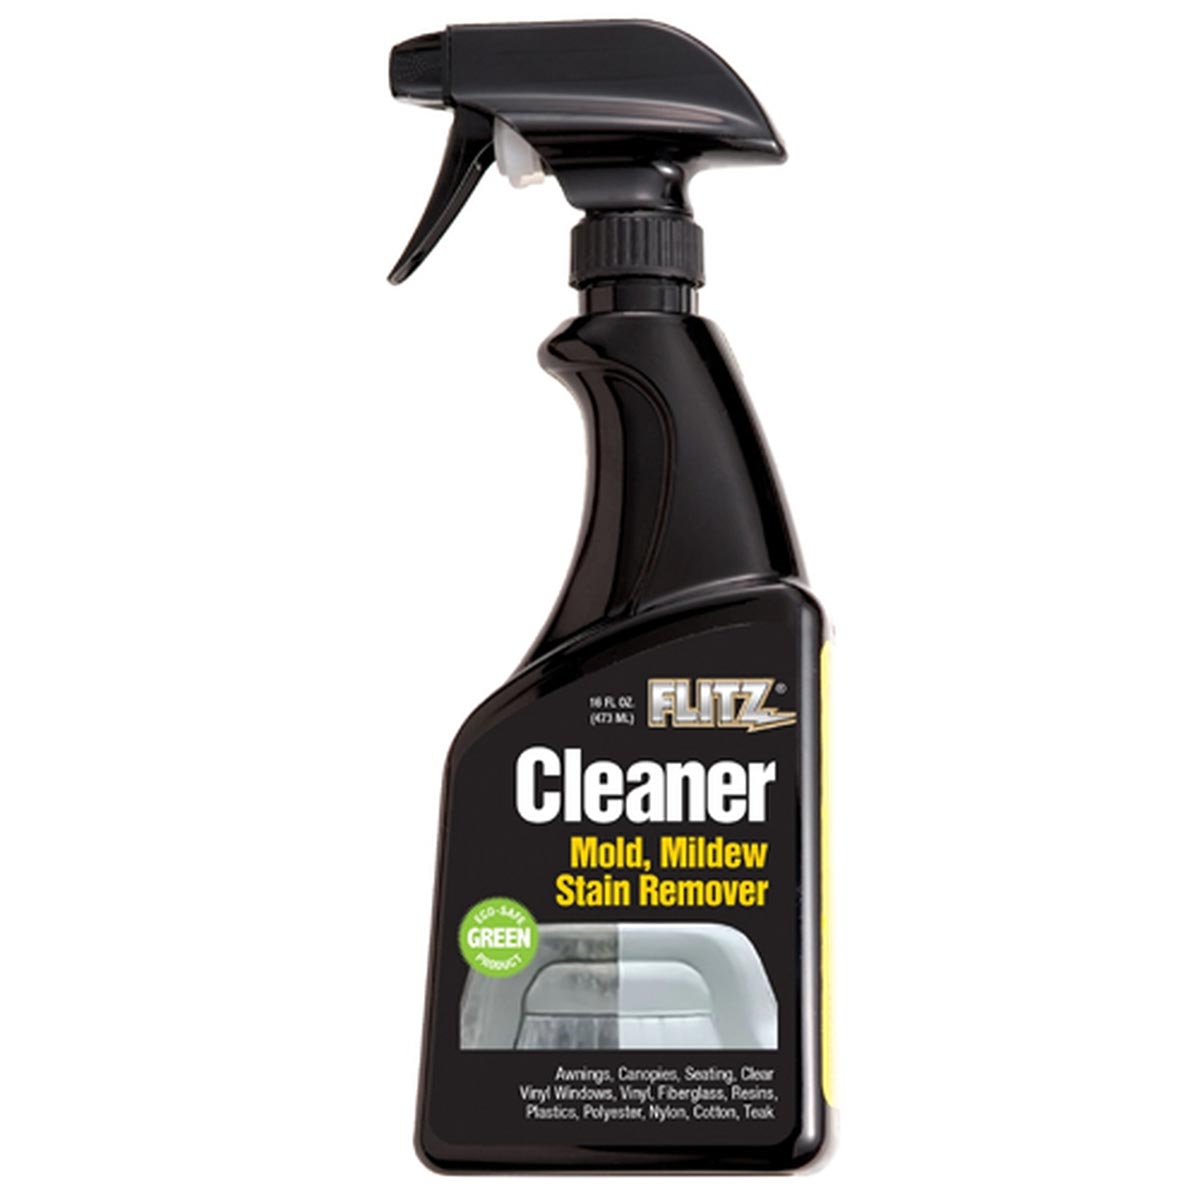 FLITZ Cleaner with Mold & Mildew Stain Remover (16oz spray bottle) MAC 20206